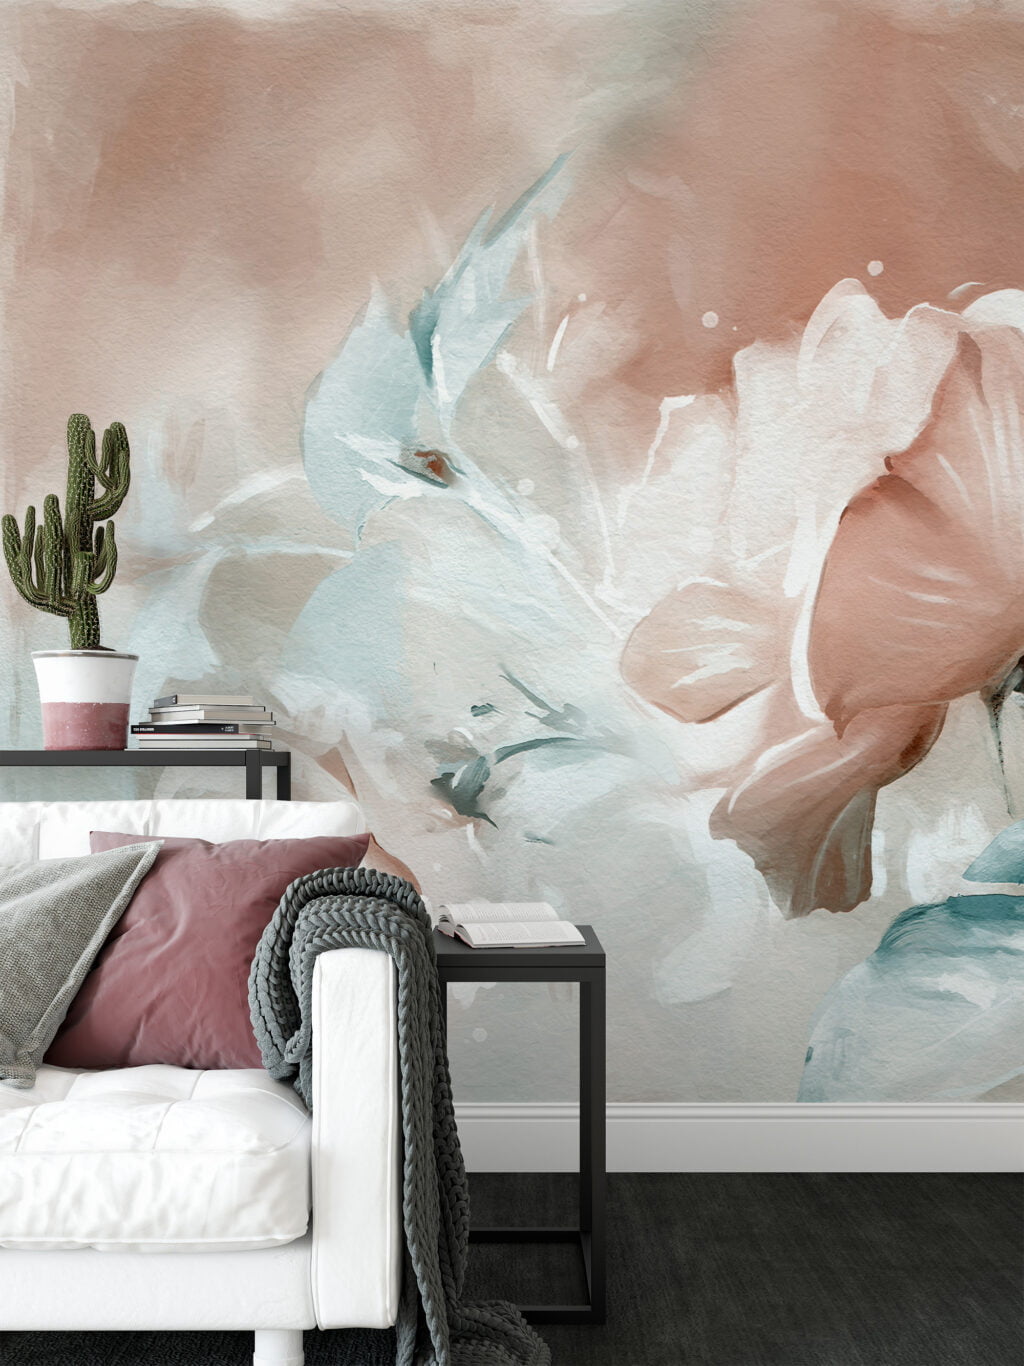 Oil Painting with Rose Flowers Wallpaper - Traditional Style Floral Design with Realistic Oil Painting Effect